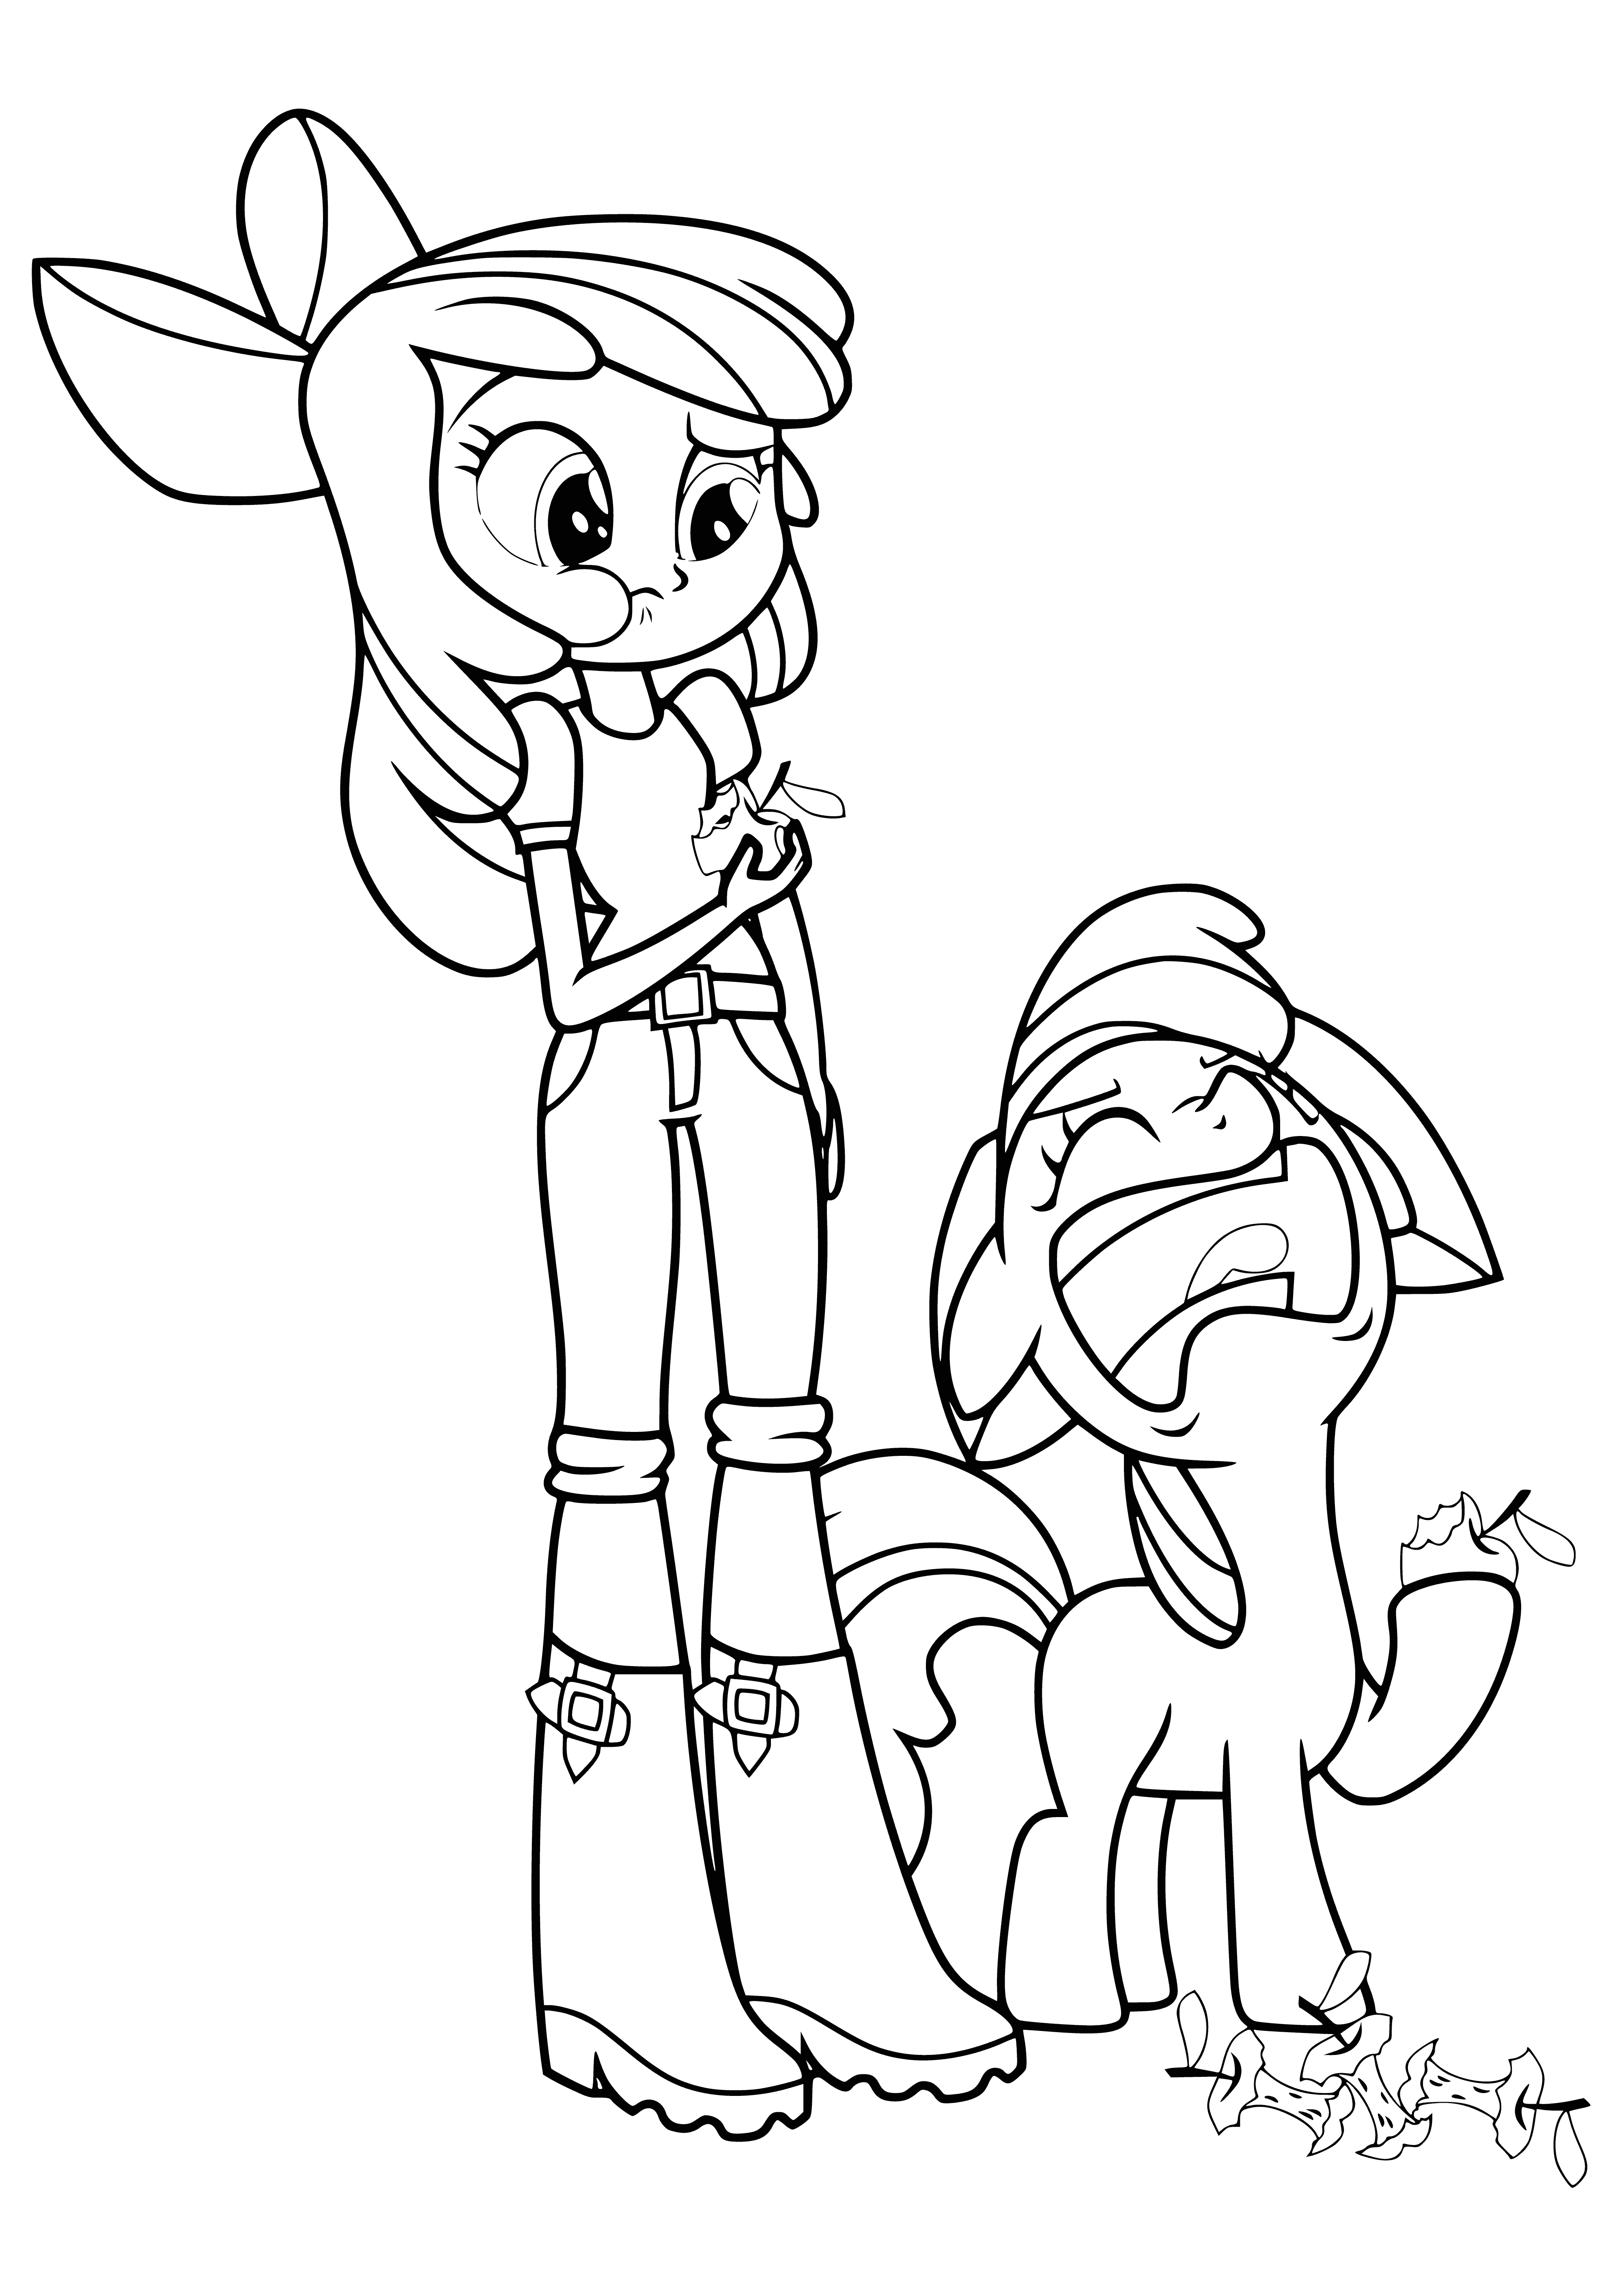 coloring page: Girl in pink & white with pony in pink & white standing together; blue bridle & jacket for girl. #equestrian